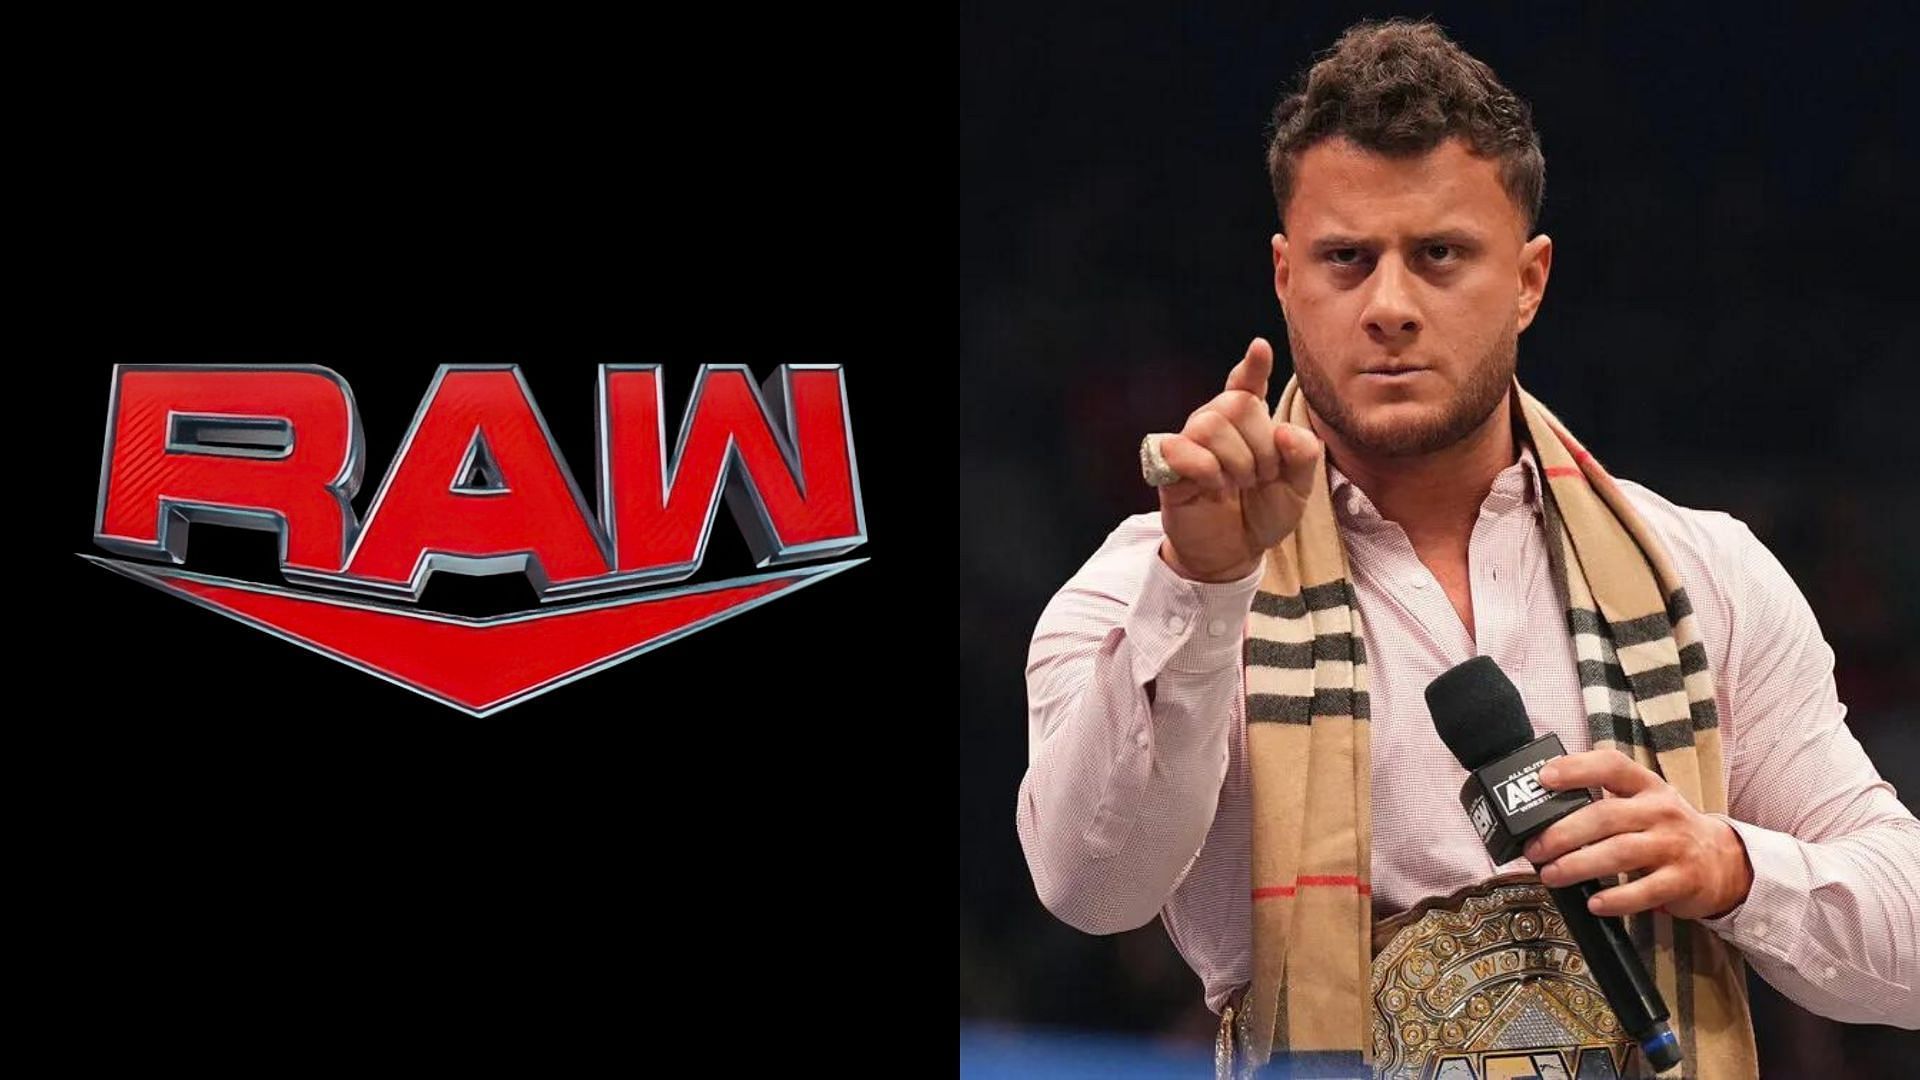 AEW World Champion MJF namedropped top stars in the industry during his promo tonight